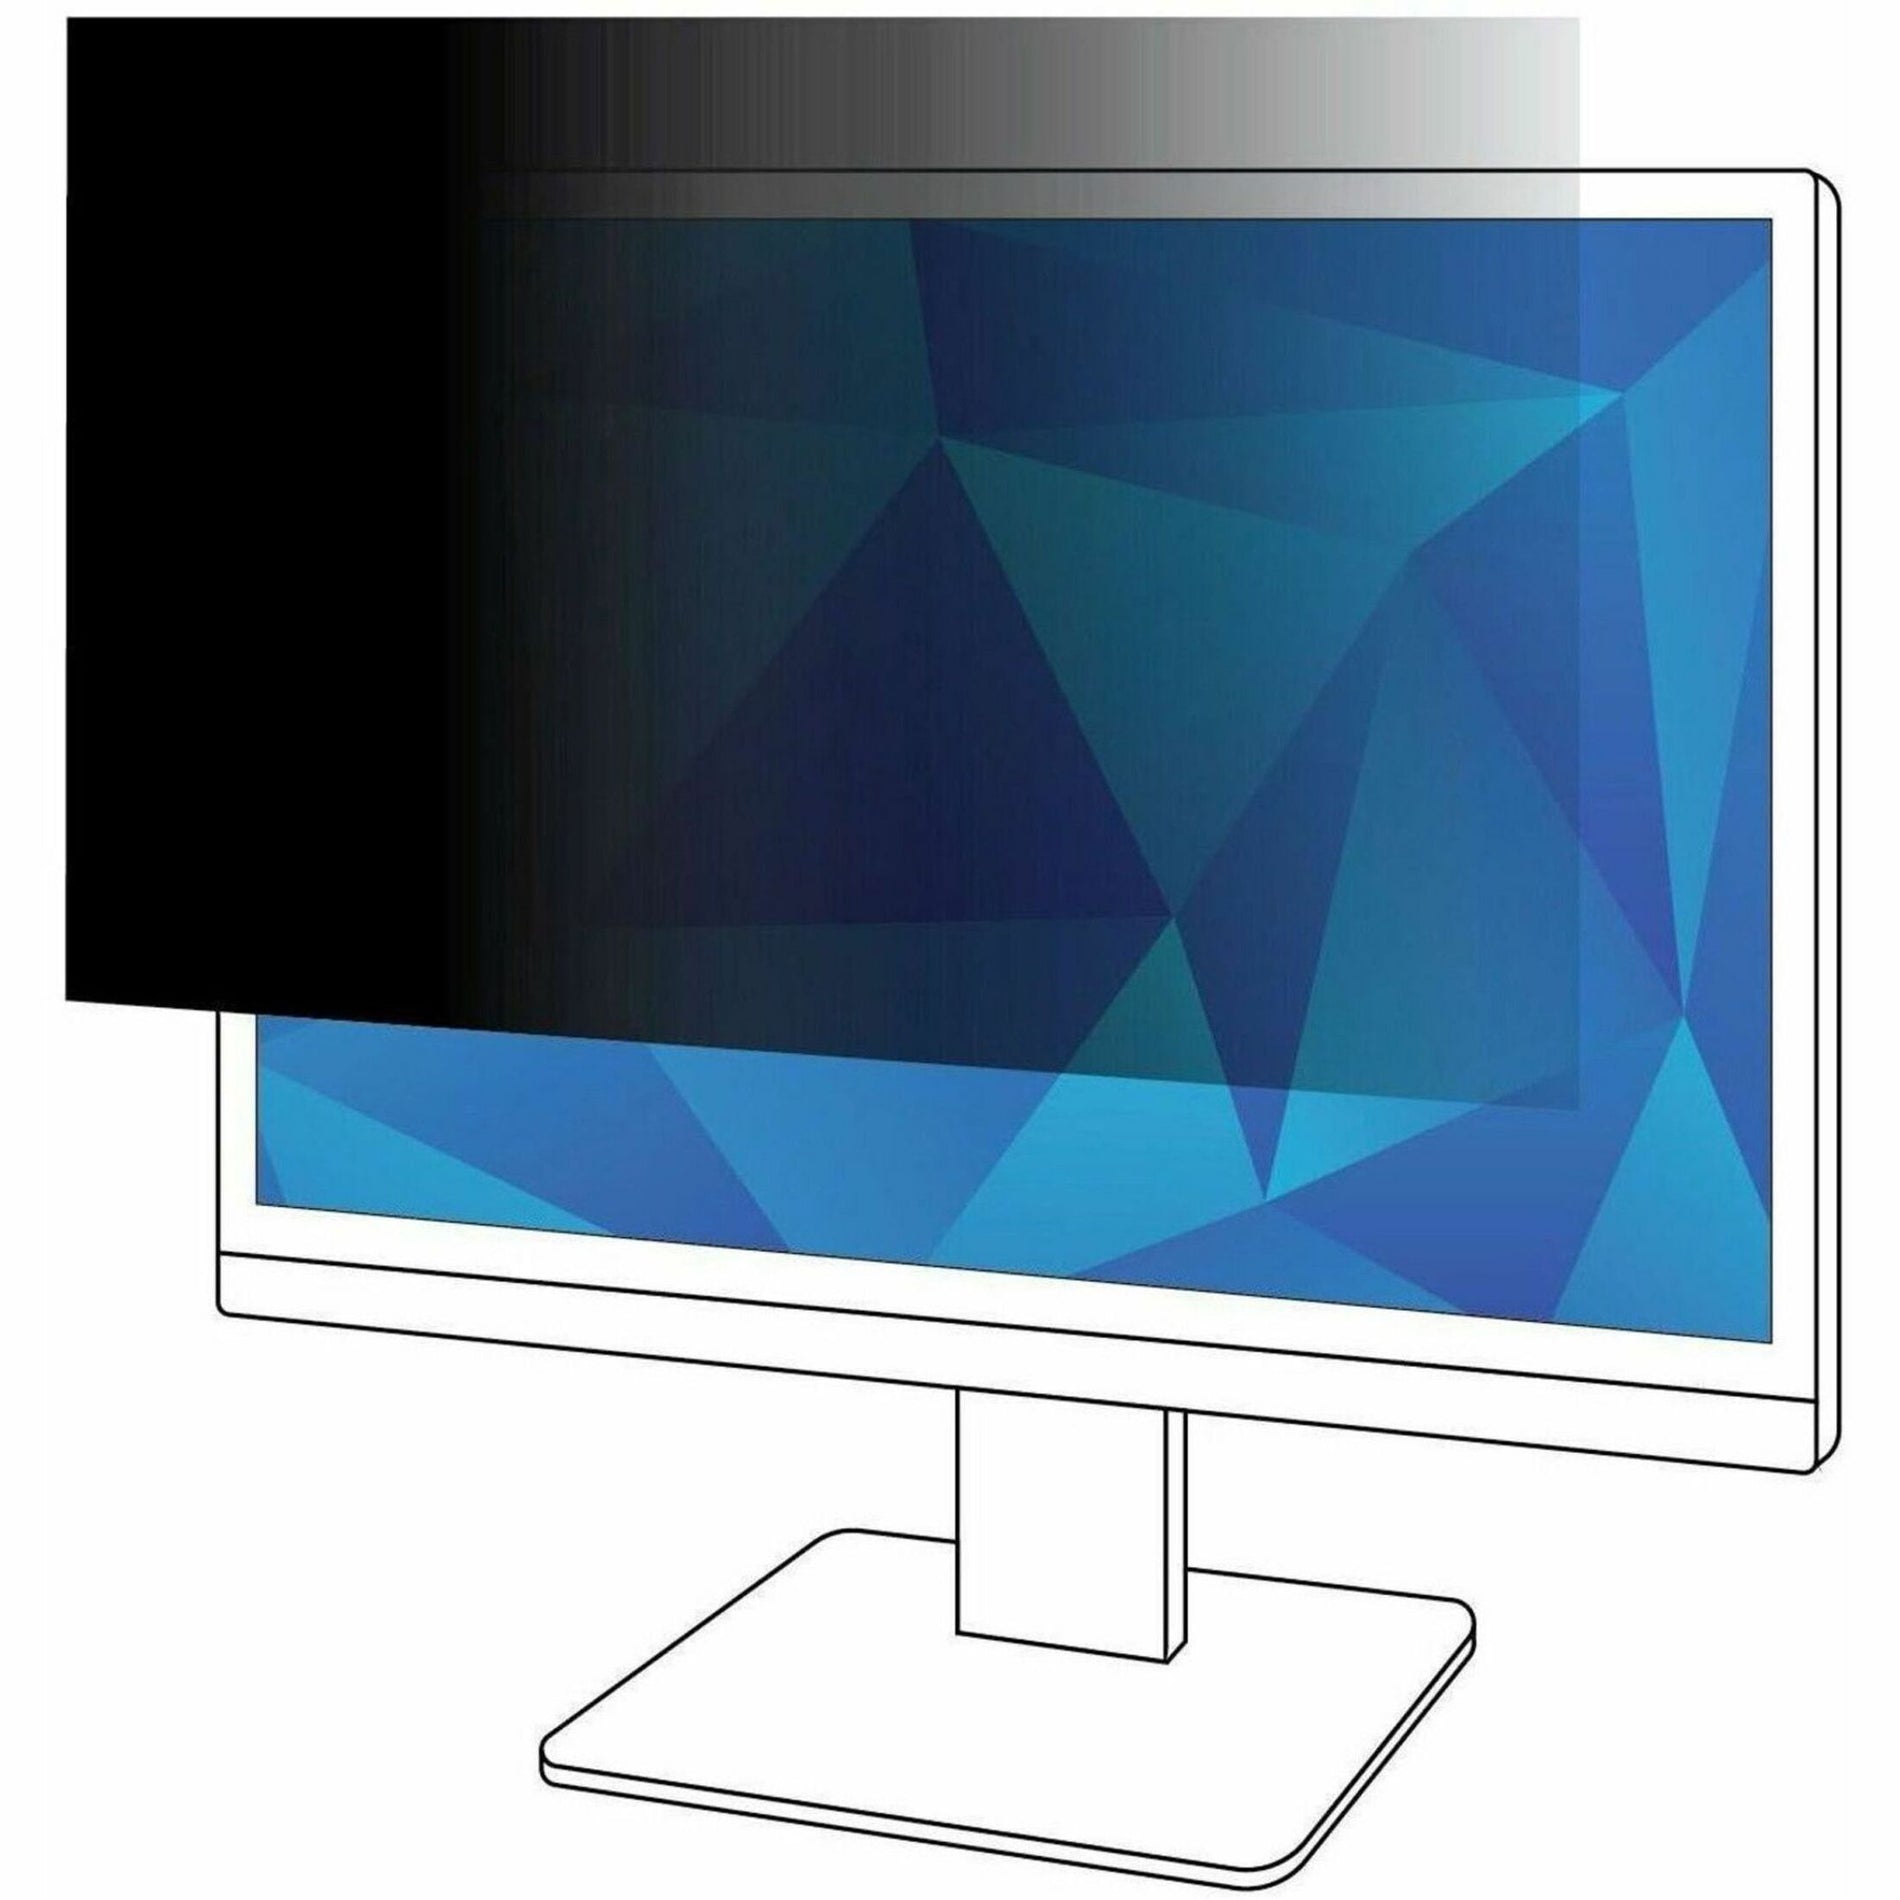 3M PF230W9B Privacy Filter for Widescreen LCD Monitor 23", Black - Easy to Apply, Easy to Clean, Limited Viewing Angle, Privacy